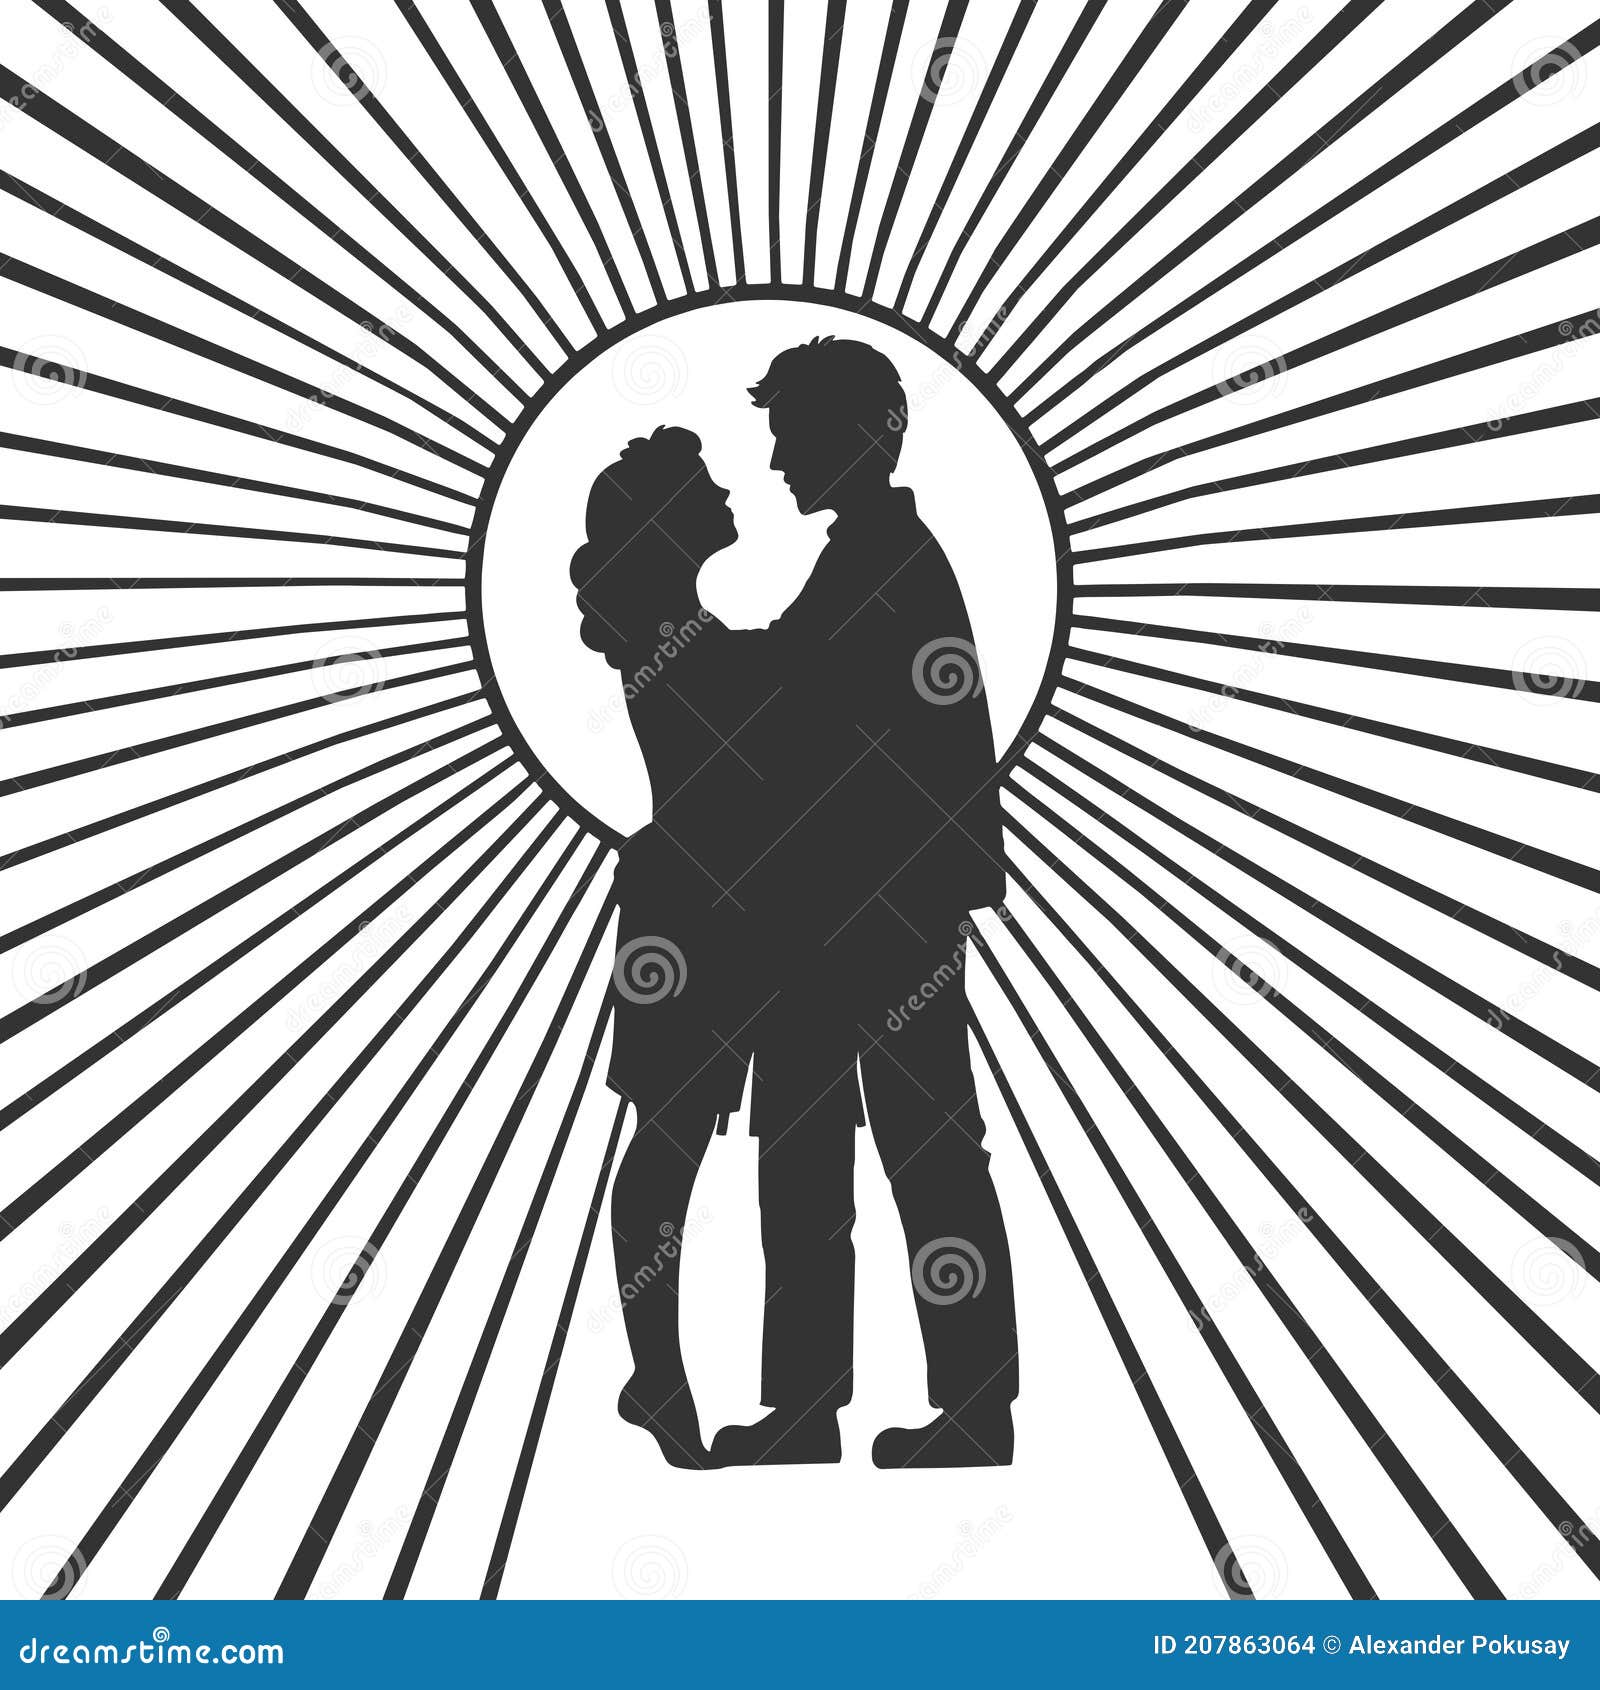 İllustration of Wedding couple Silhouette free image download